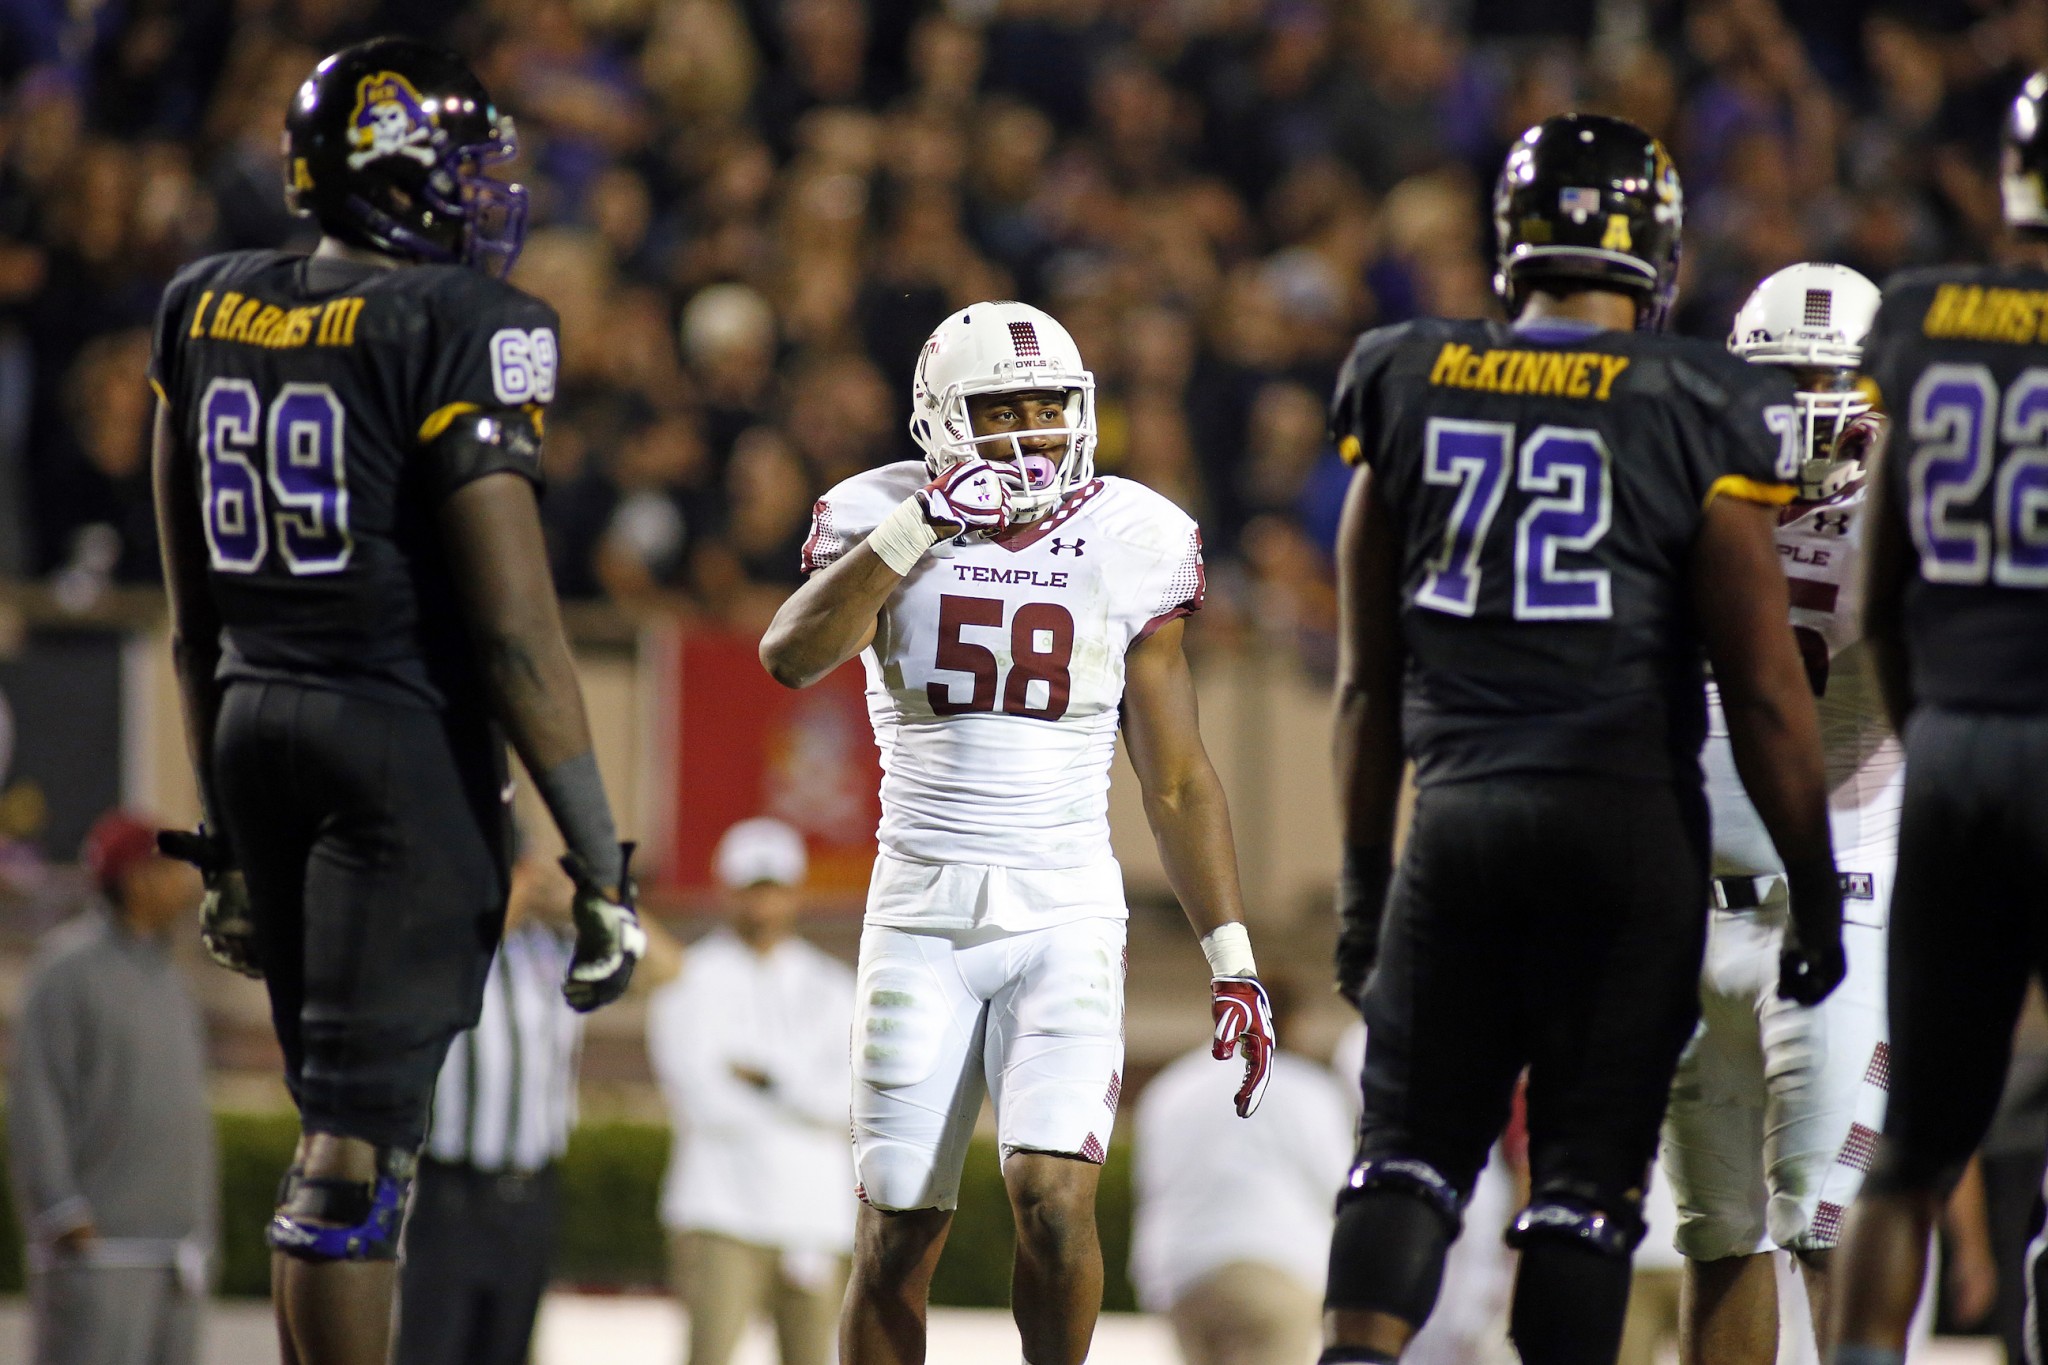 Temple's Haason Reddick (58) during the second half of an NCAA college football game against East Carolina in Greenville, N.C., Thursday, Oct. 22, 2015. (AP Photo/Karl B DeBlaker)